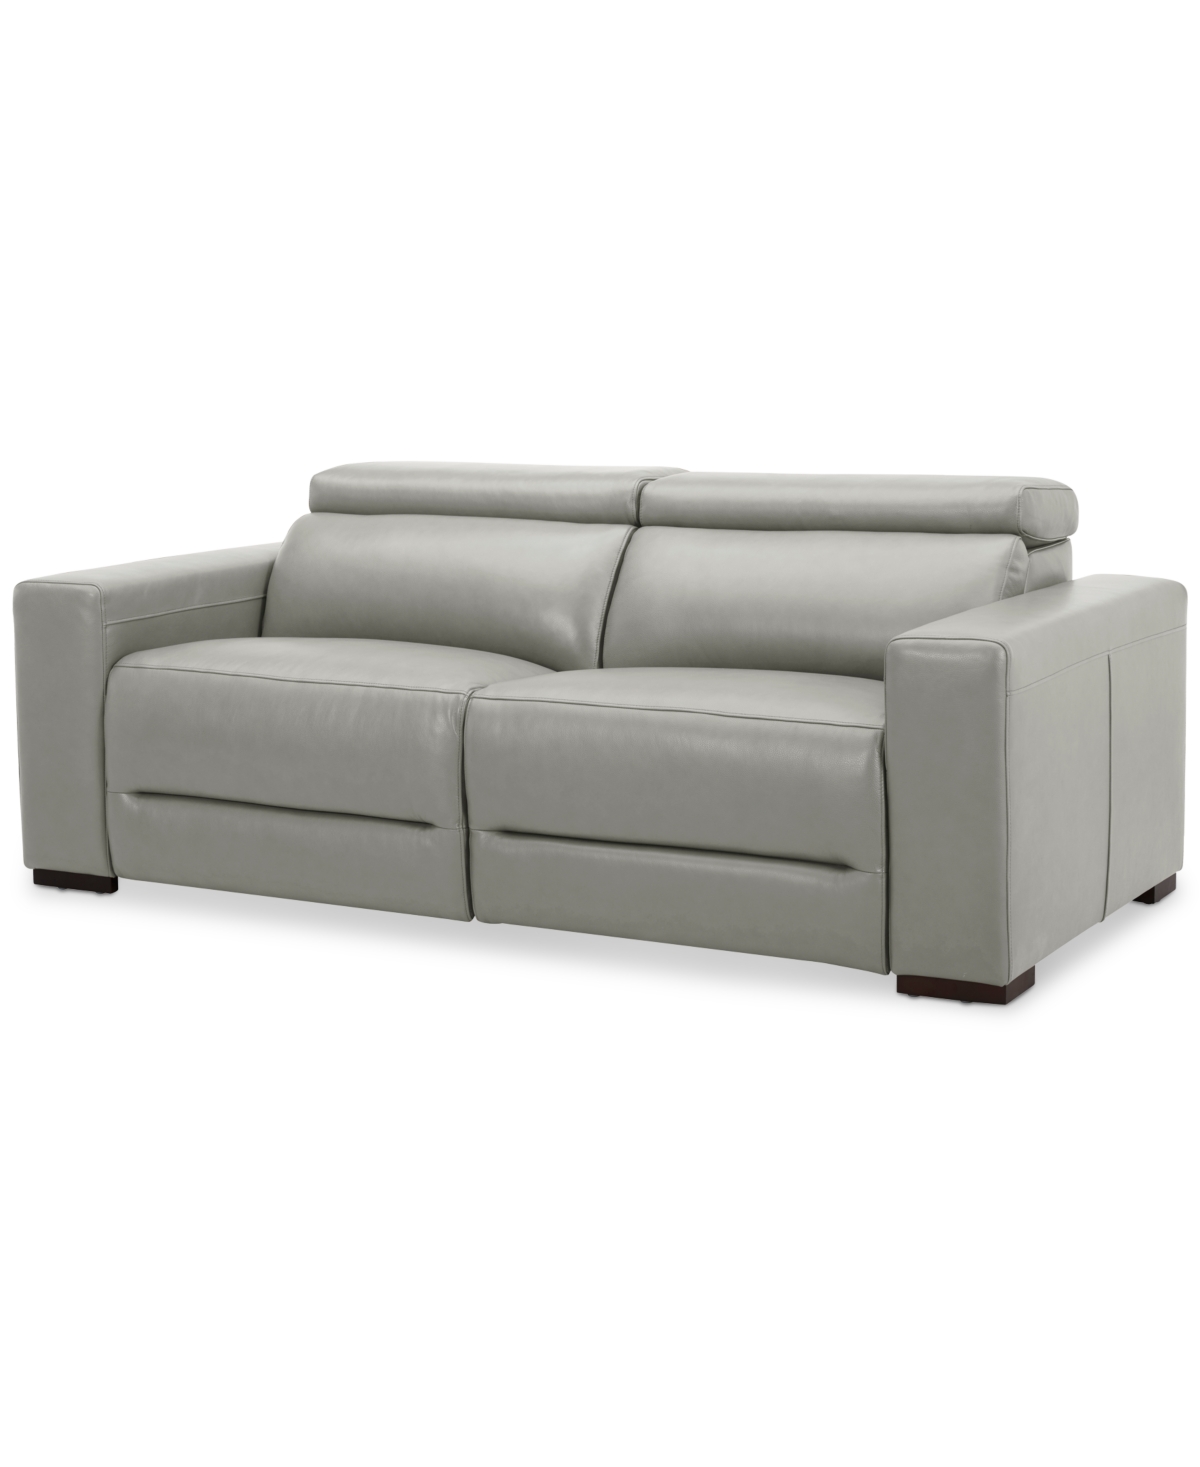 Macy's Nevio 82" 2-pc. Leather Sectional With 2 Power Recliners And Headrests, Created For  In Light Grey